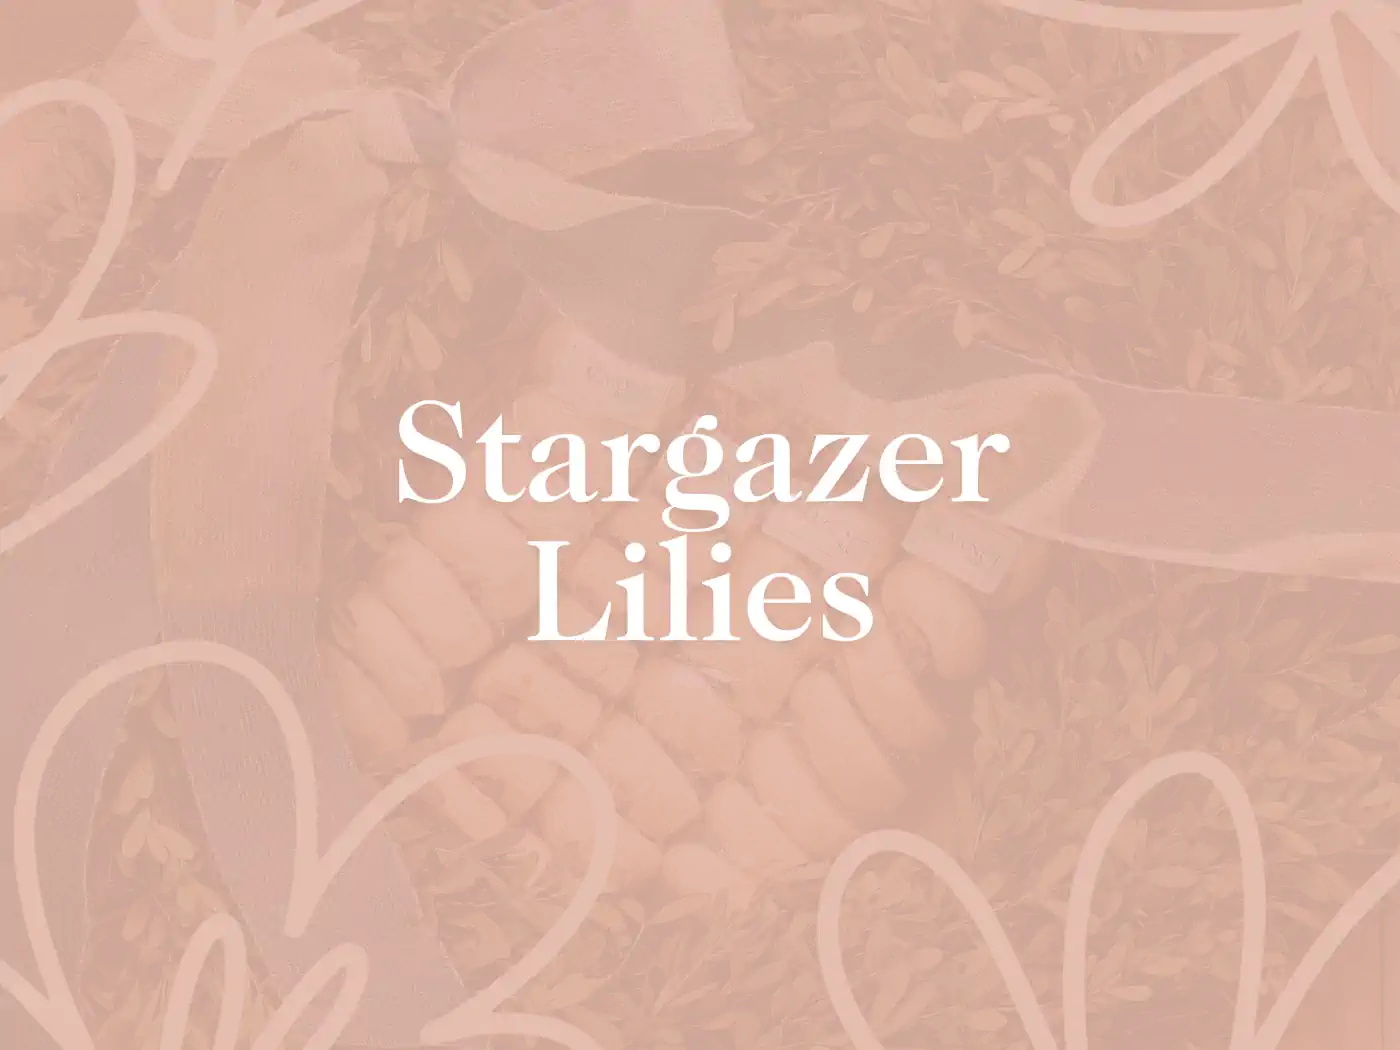 **Elegant text overlay on a delicate background of stargazer lilies, perfect for floral arrangements. Fabulous Flowers and Gifts.**